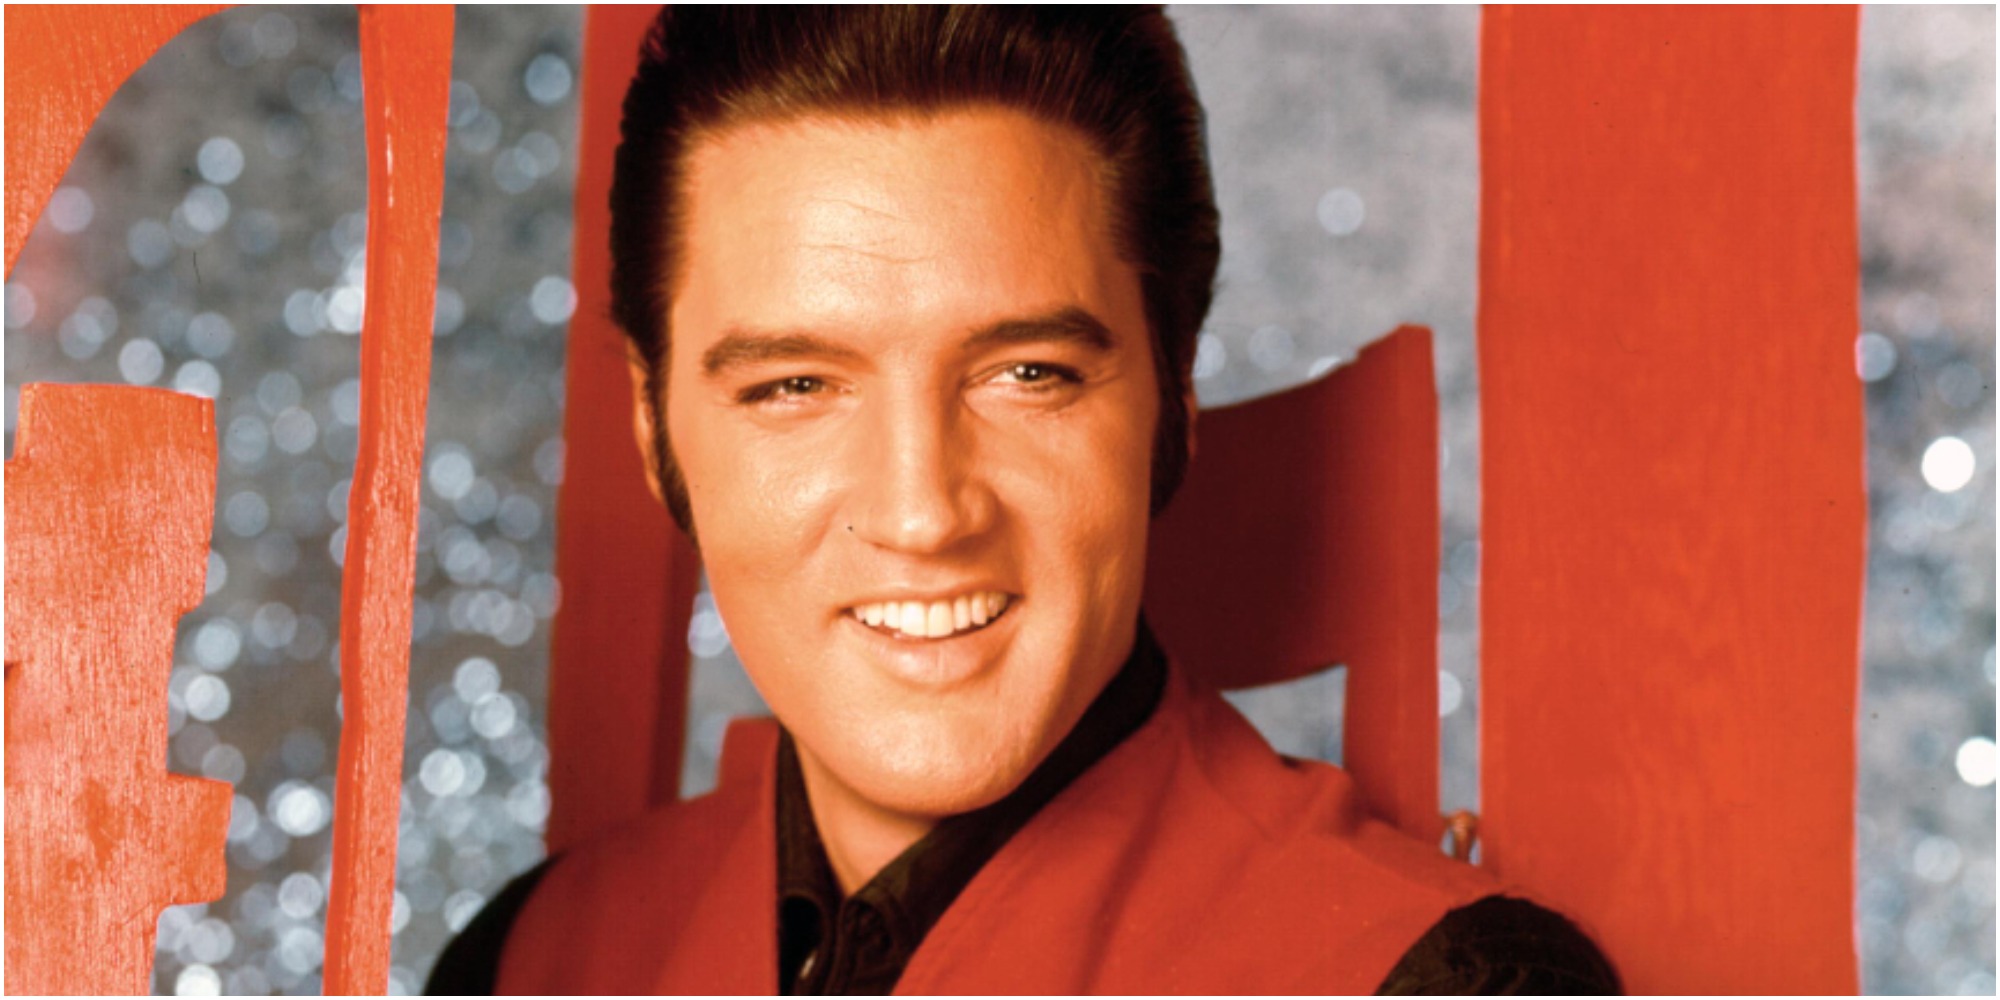 Elvis Presley wears a red vest during his comeback special.